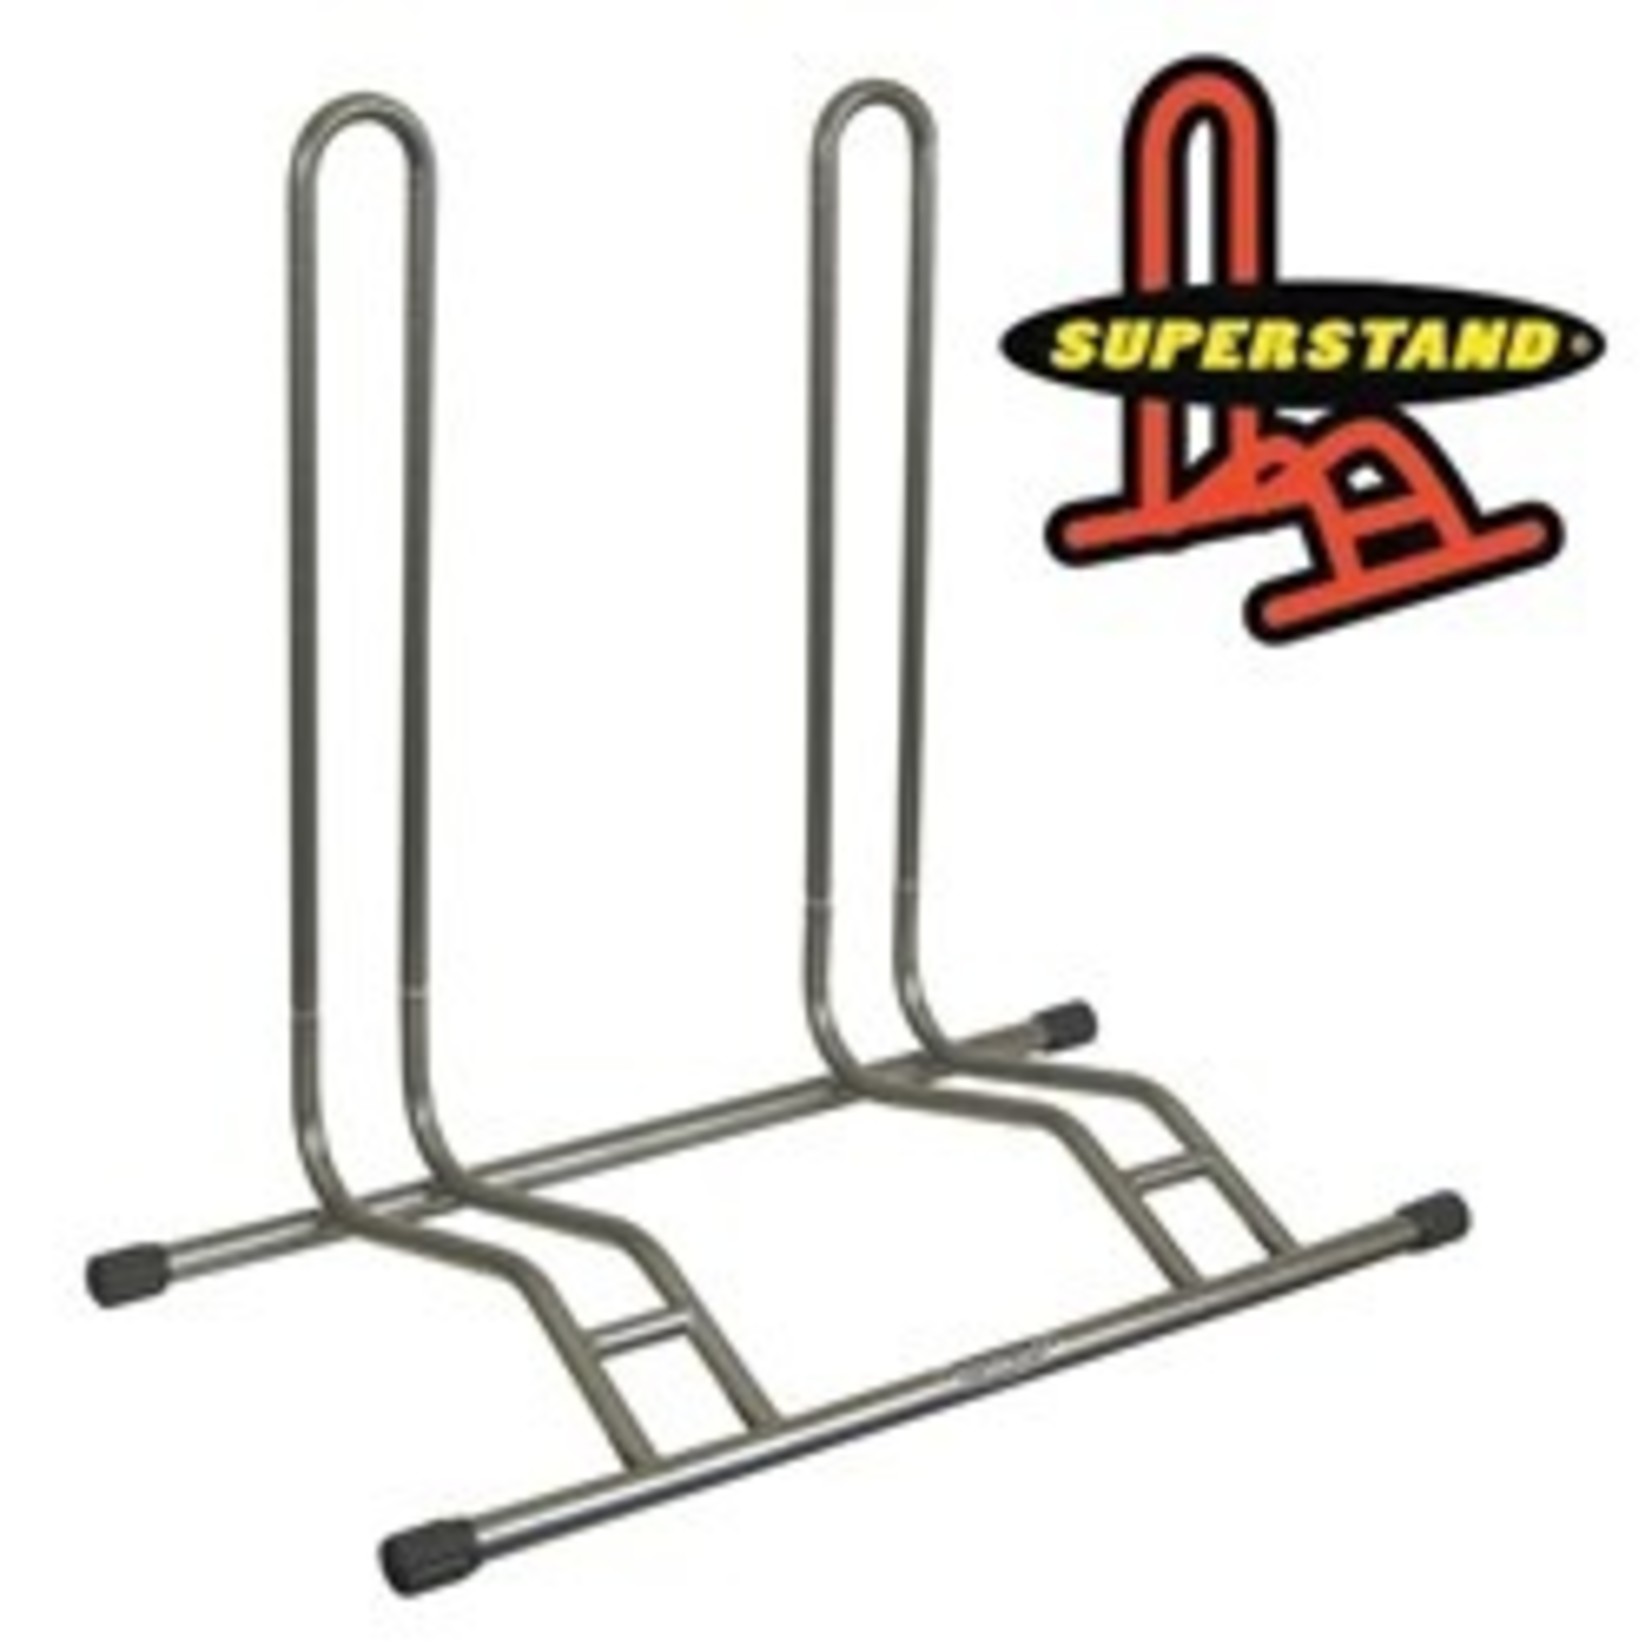 Superstand Superstand 2 Bike Storage Stand - Suits Up to 29er Wheels & 2.5" Wide Tyres